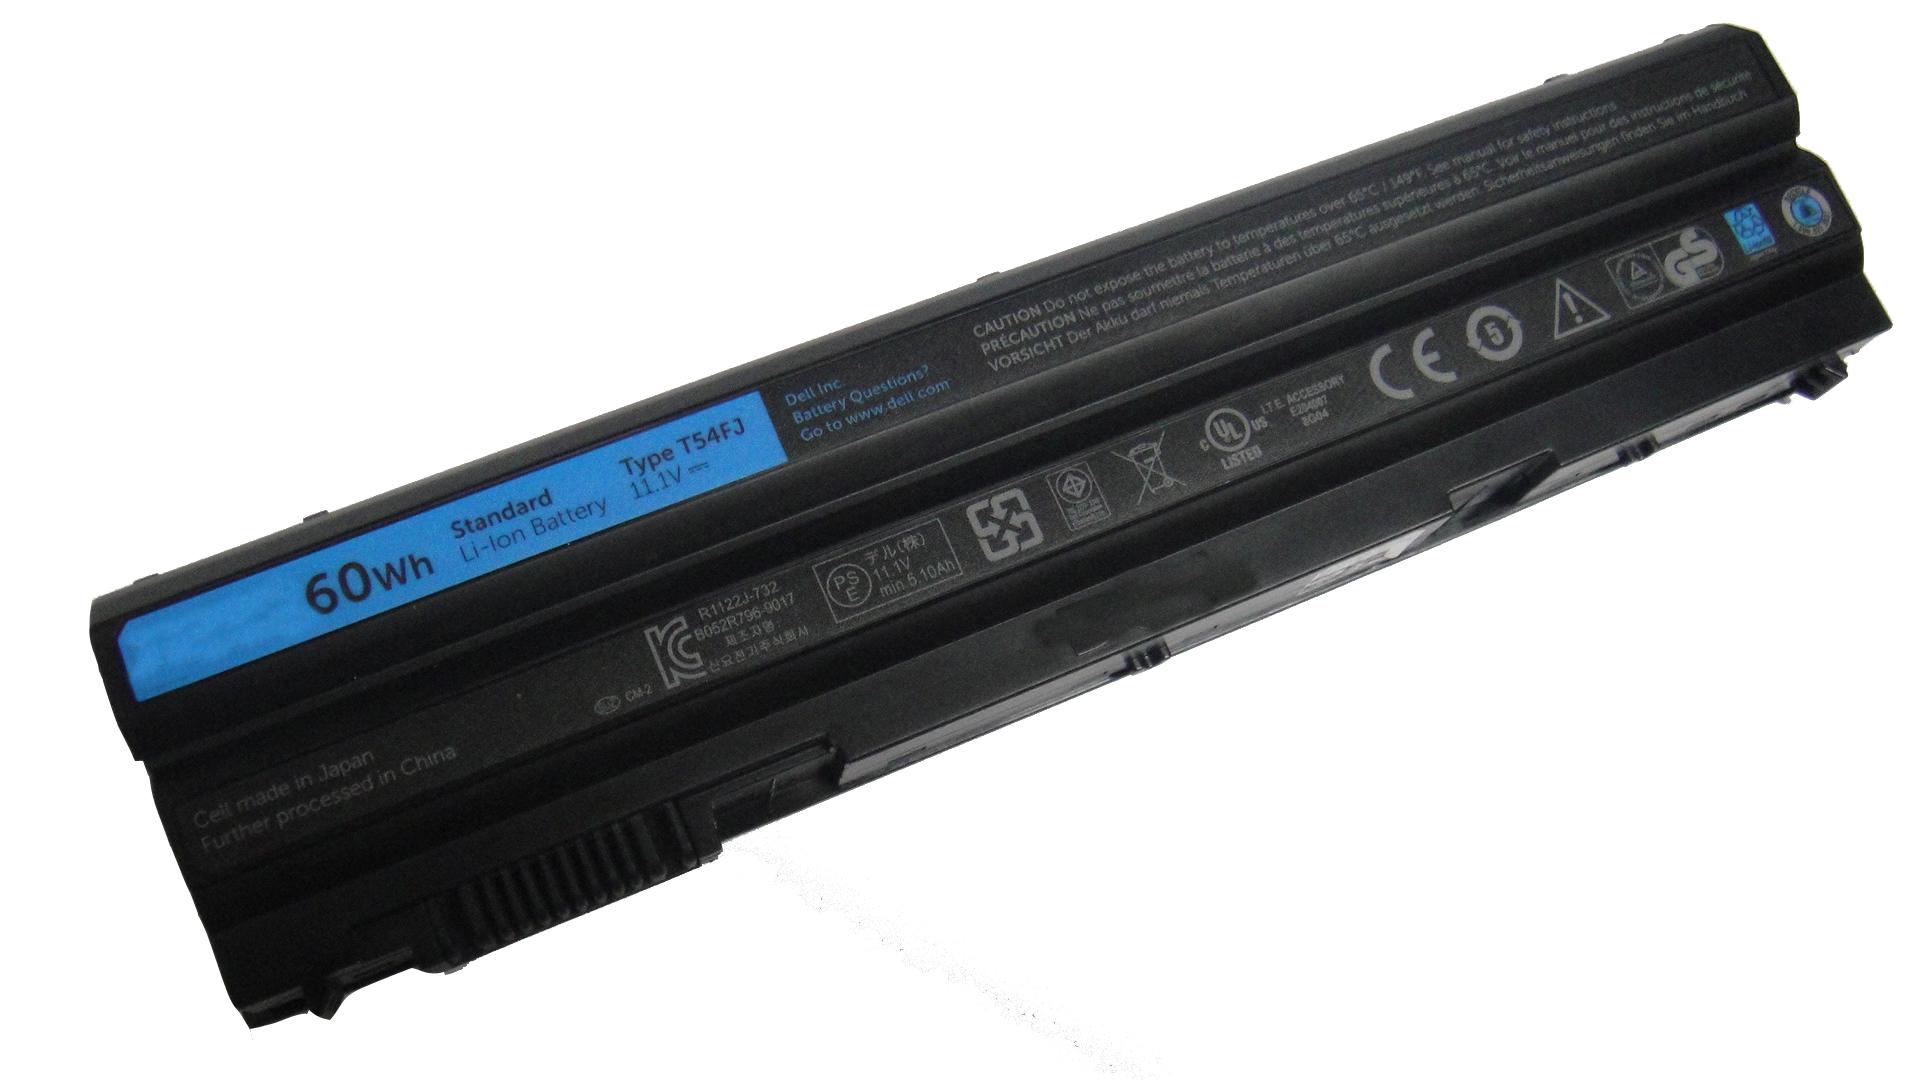 Dell Laptop Battery Guide and Price details